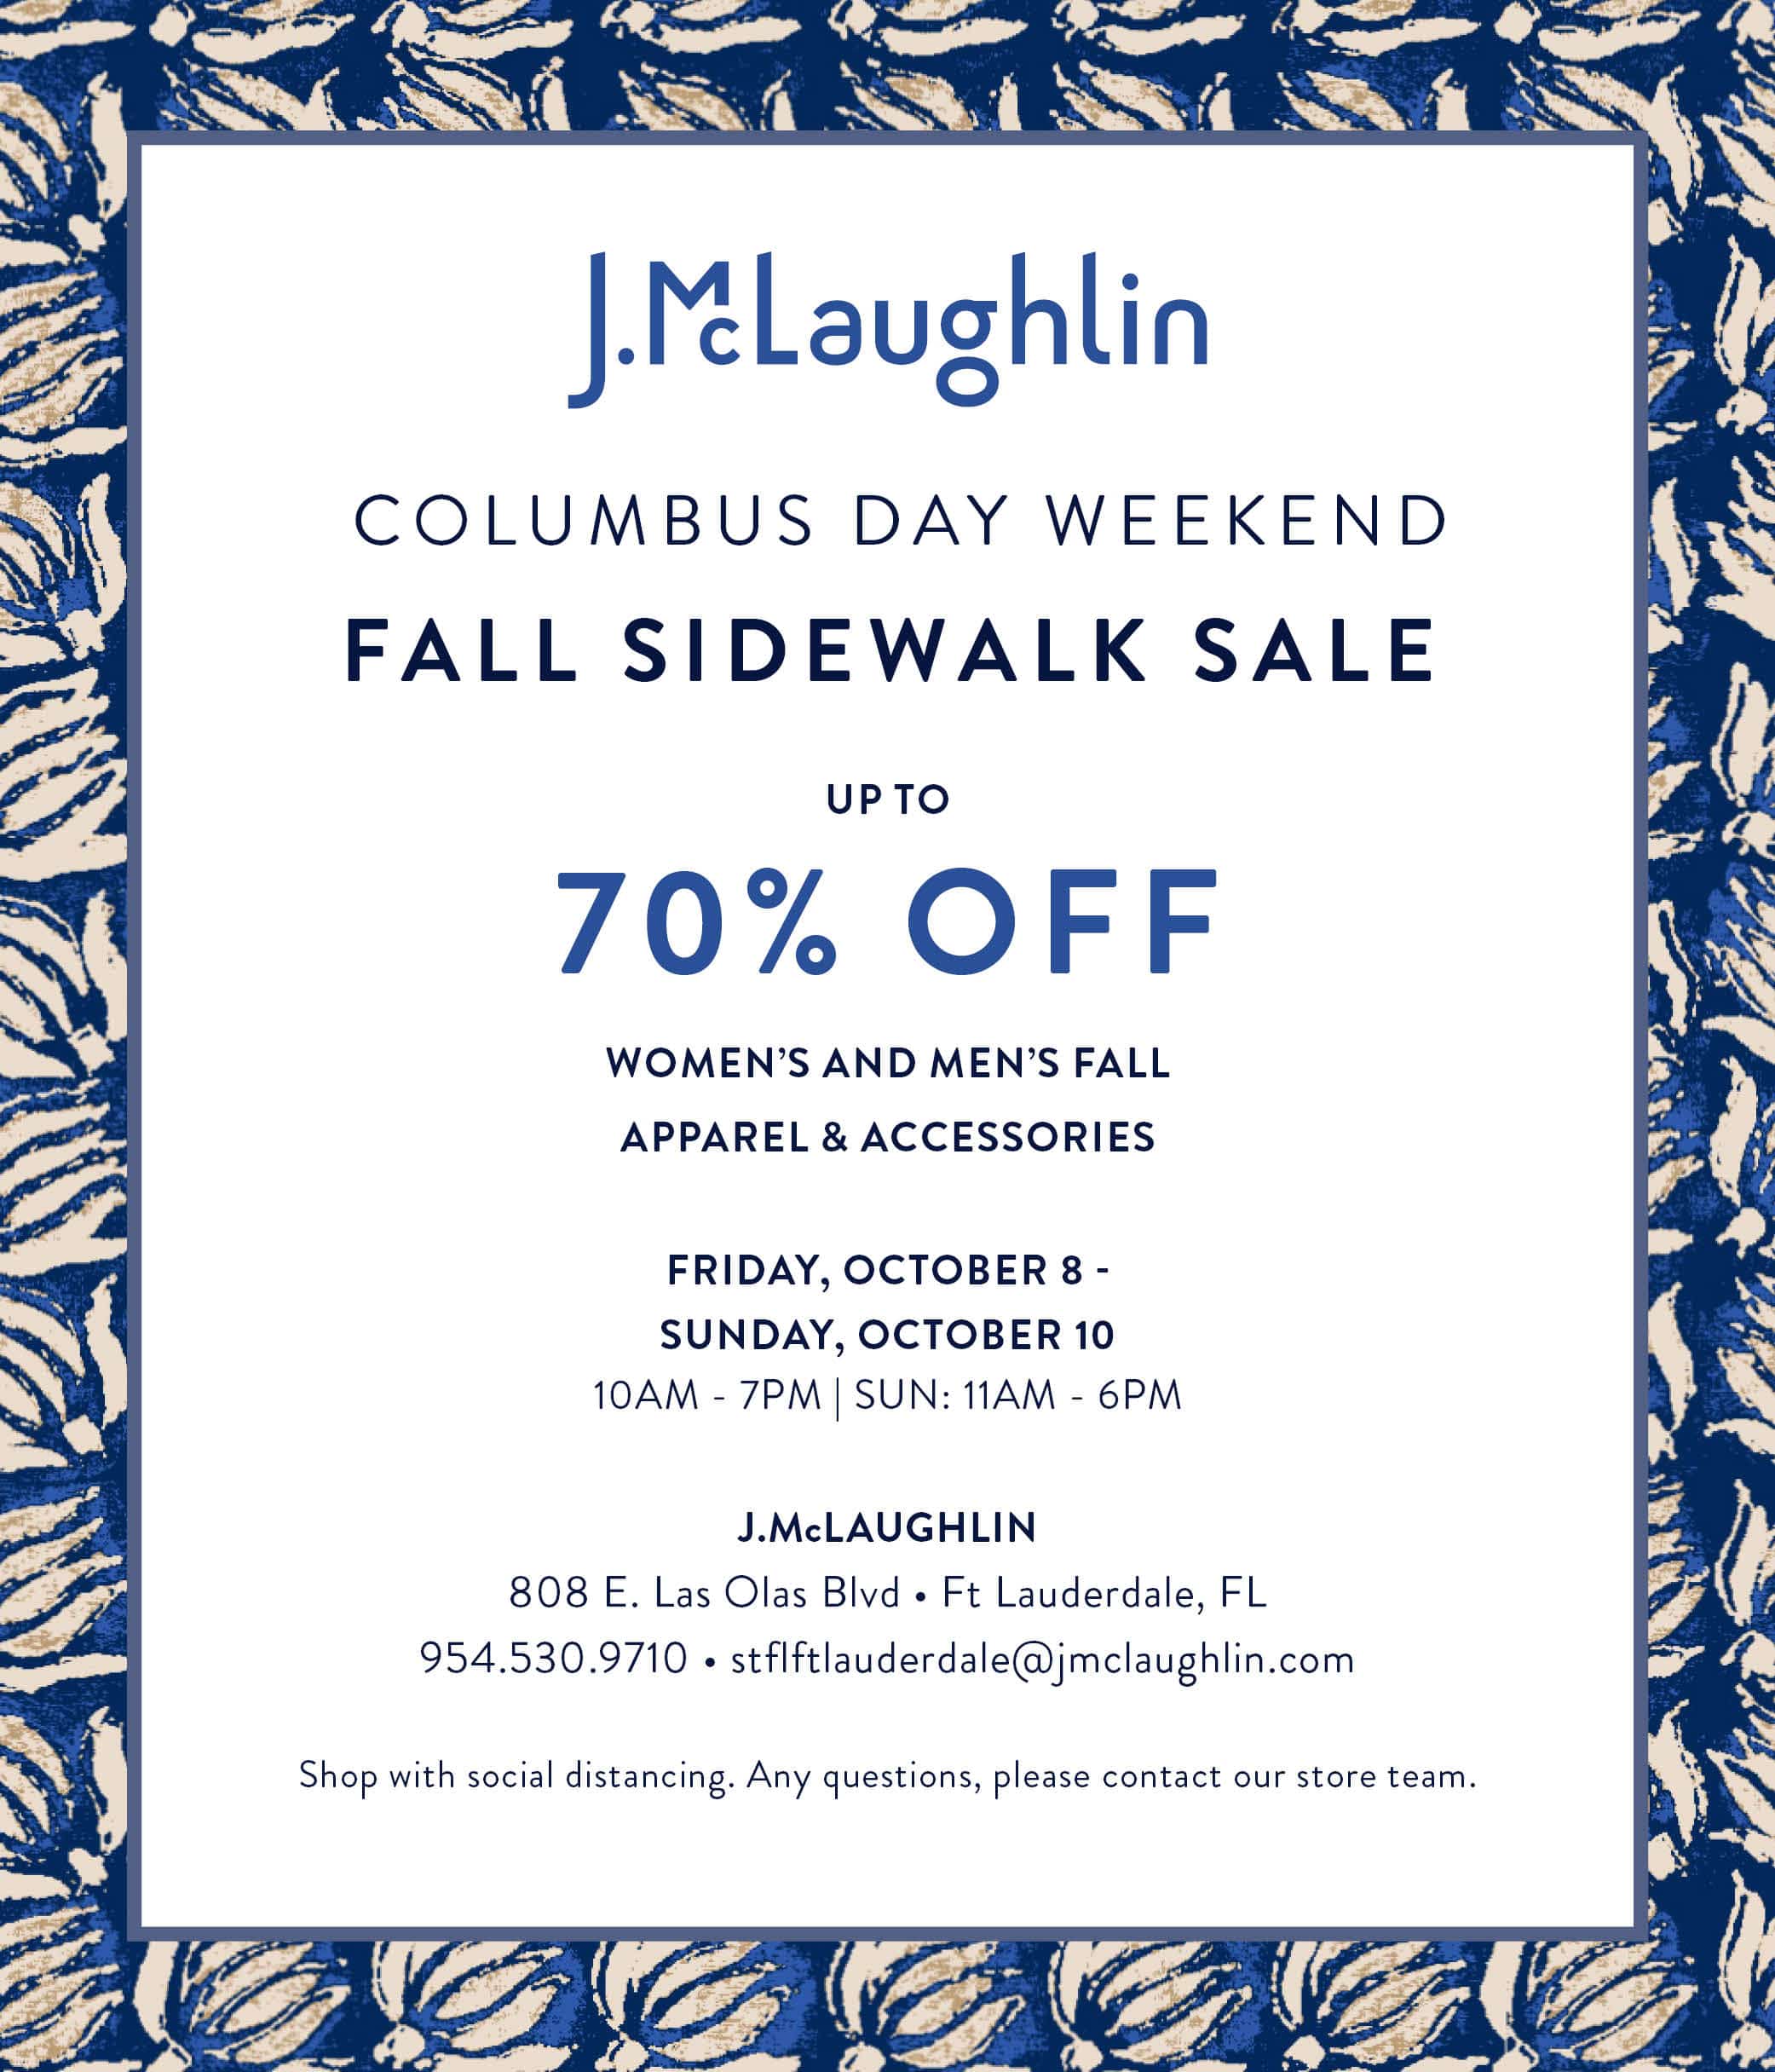 J.McLaughlin - Columbus Day Weekend FALL Sidewalk Sale up to 70% Off